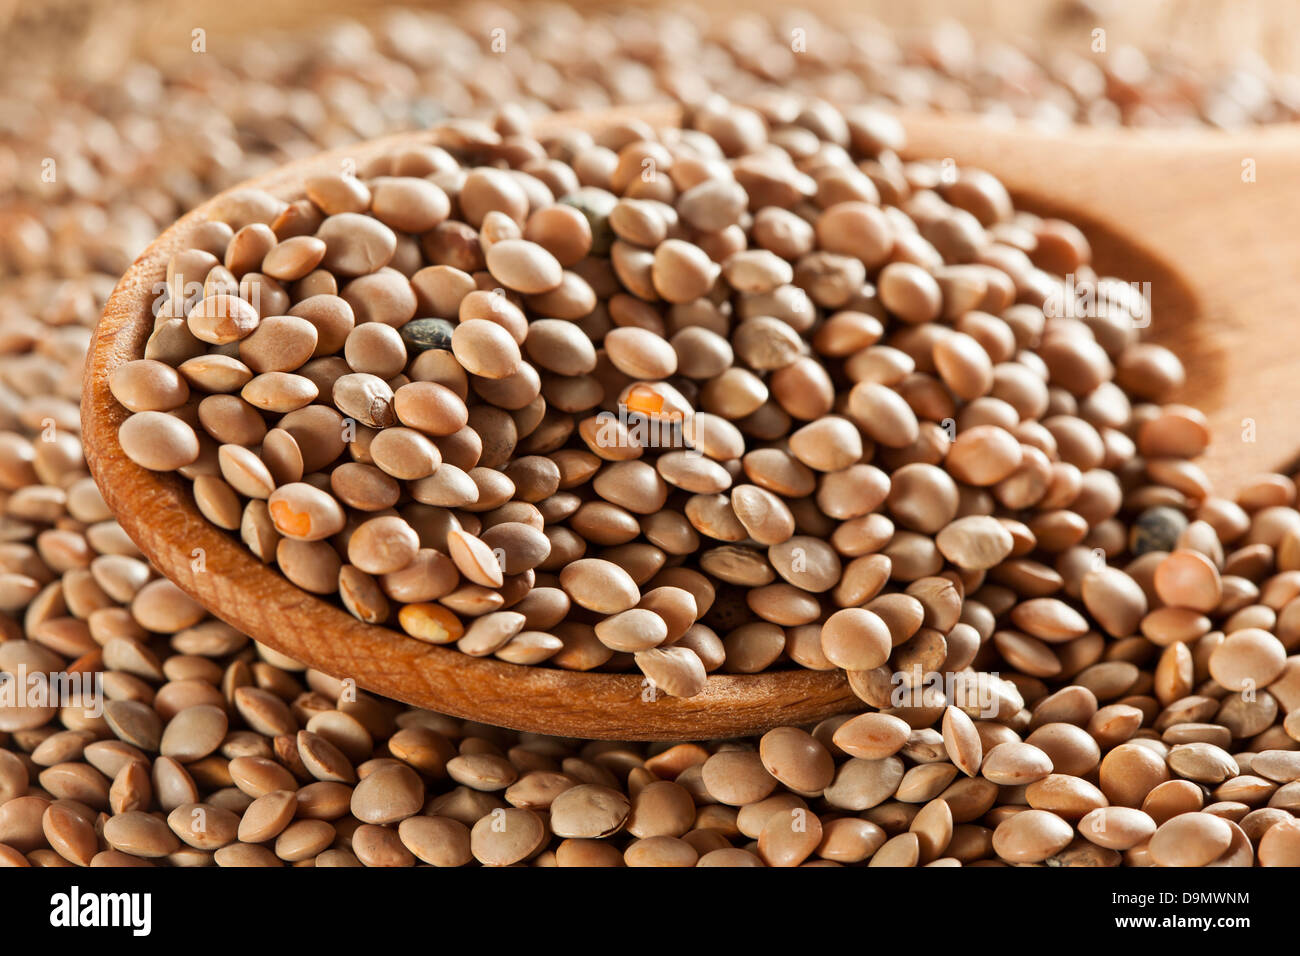 Dry Organic Brown Lentils against a background Stock Photo